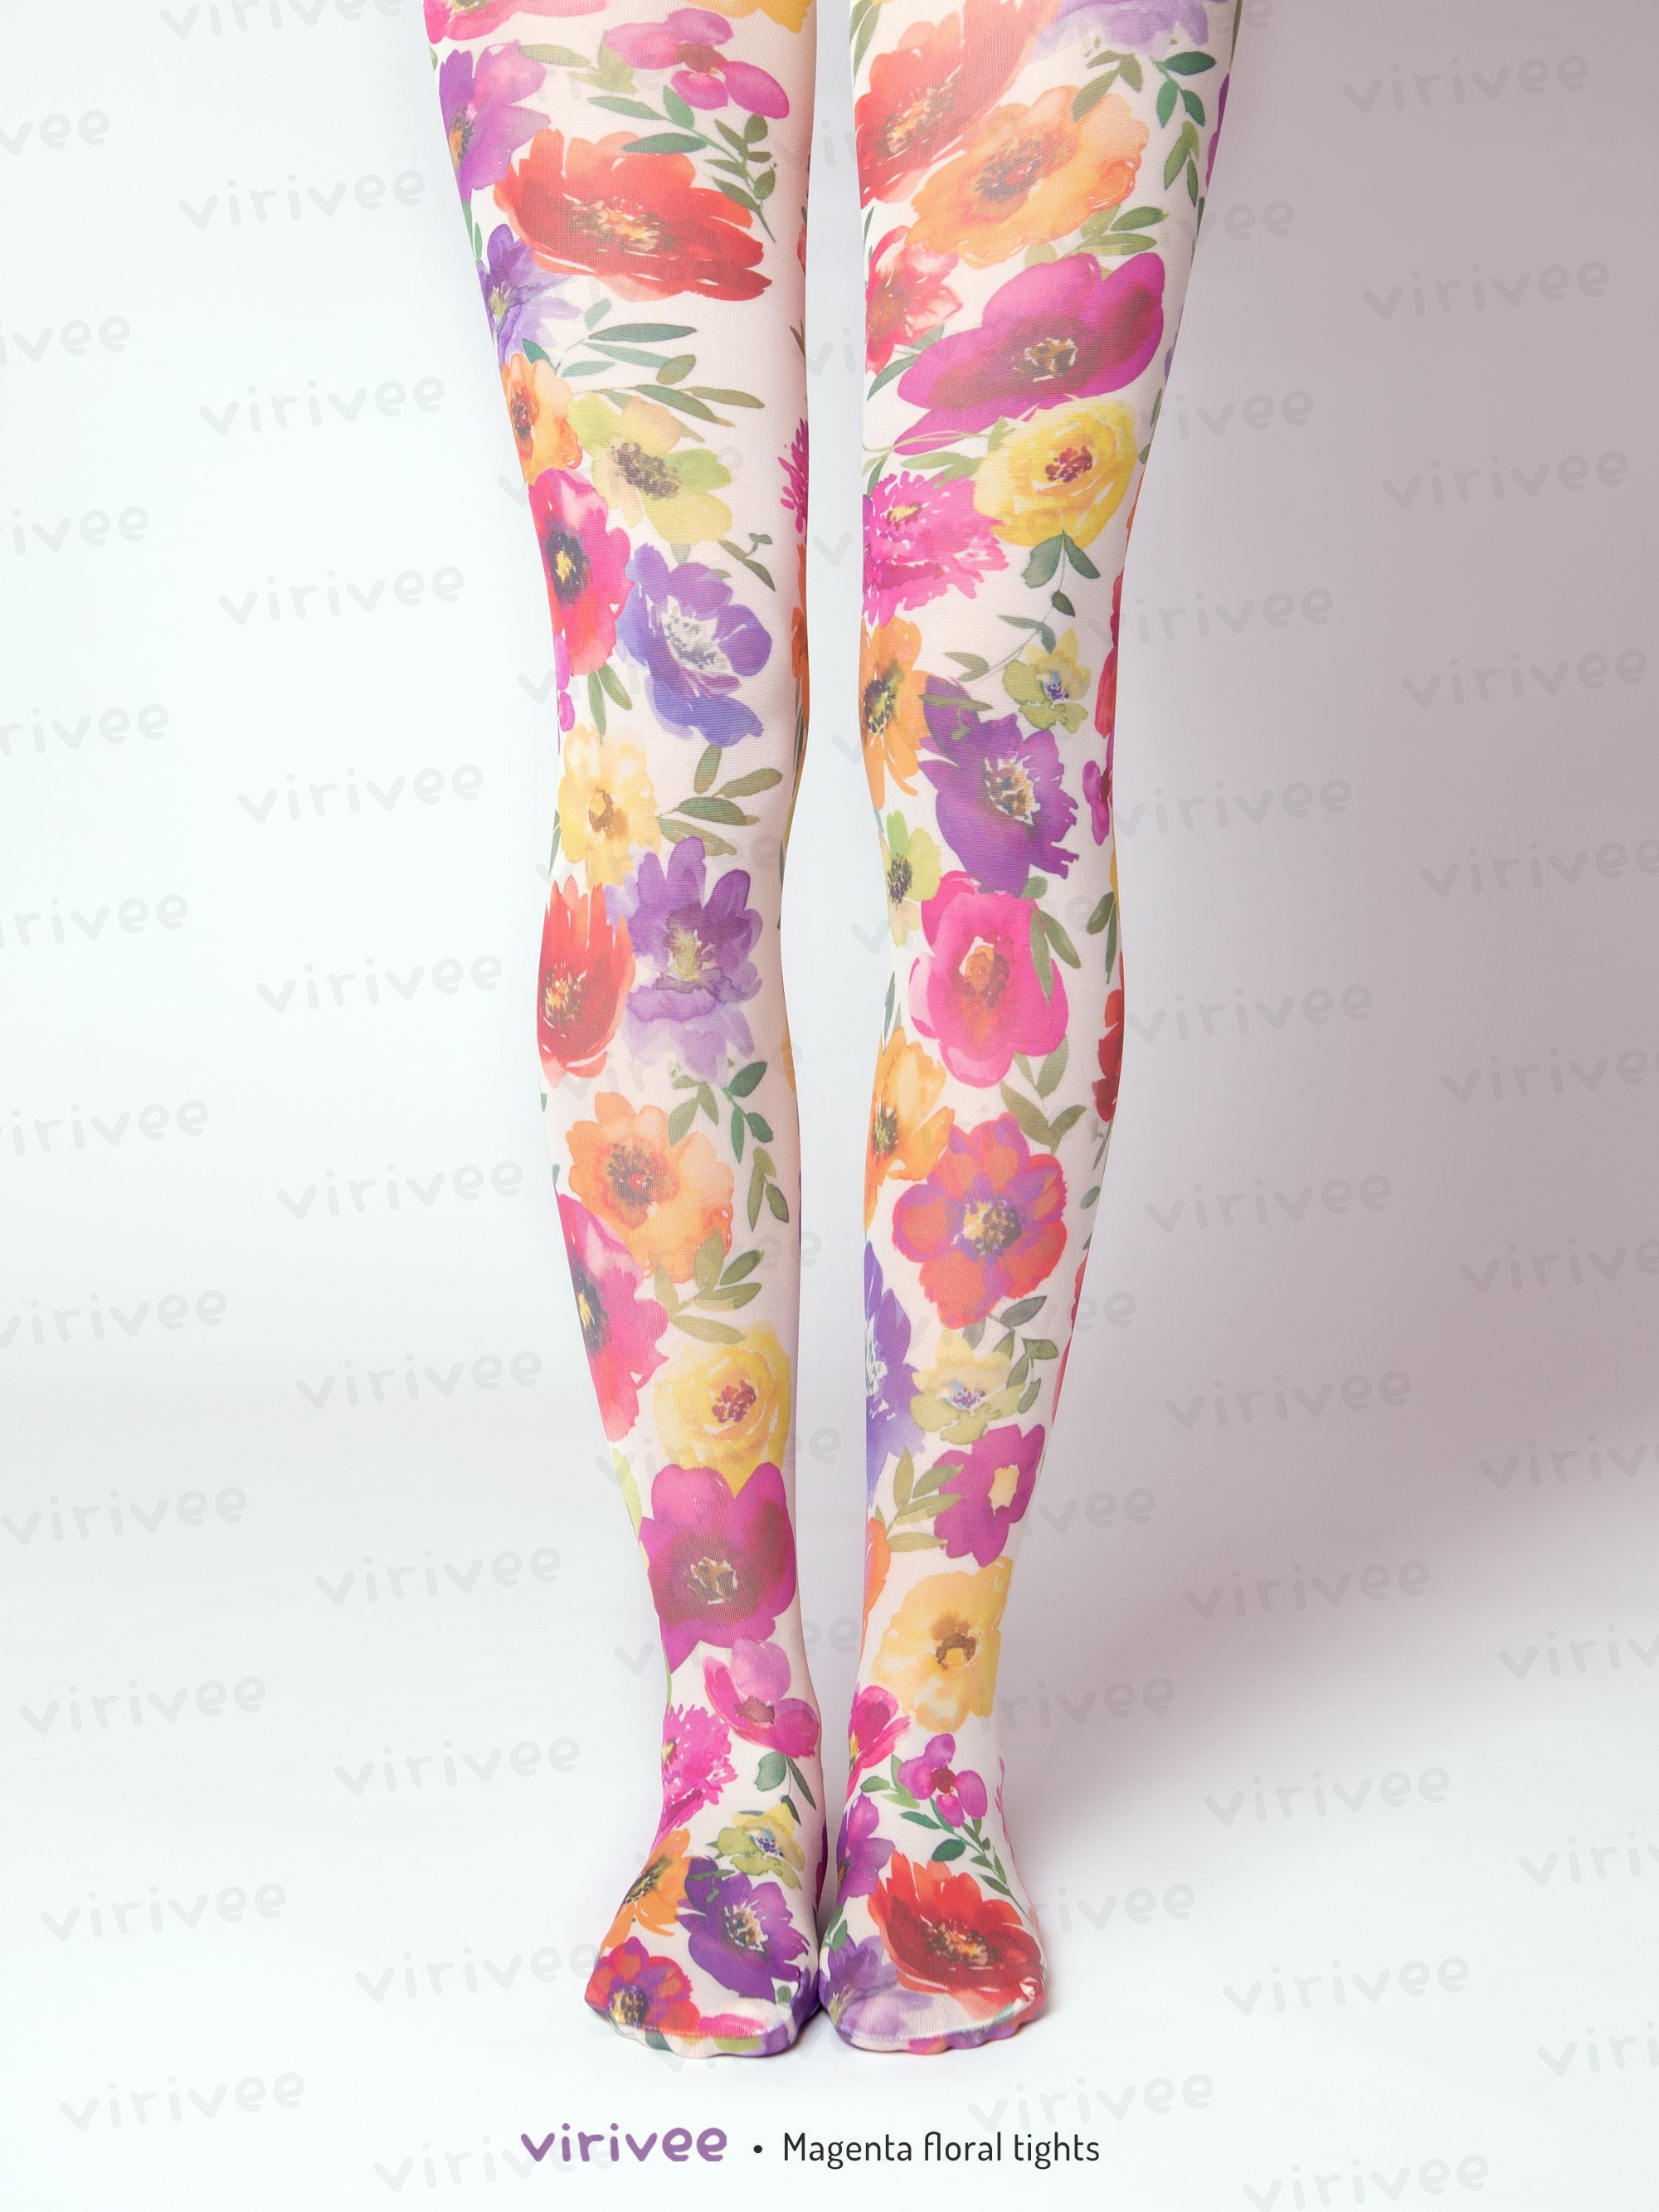 Mushroom and potion gothic tights, pink - Virivee Tights - Unique